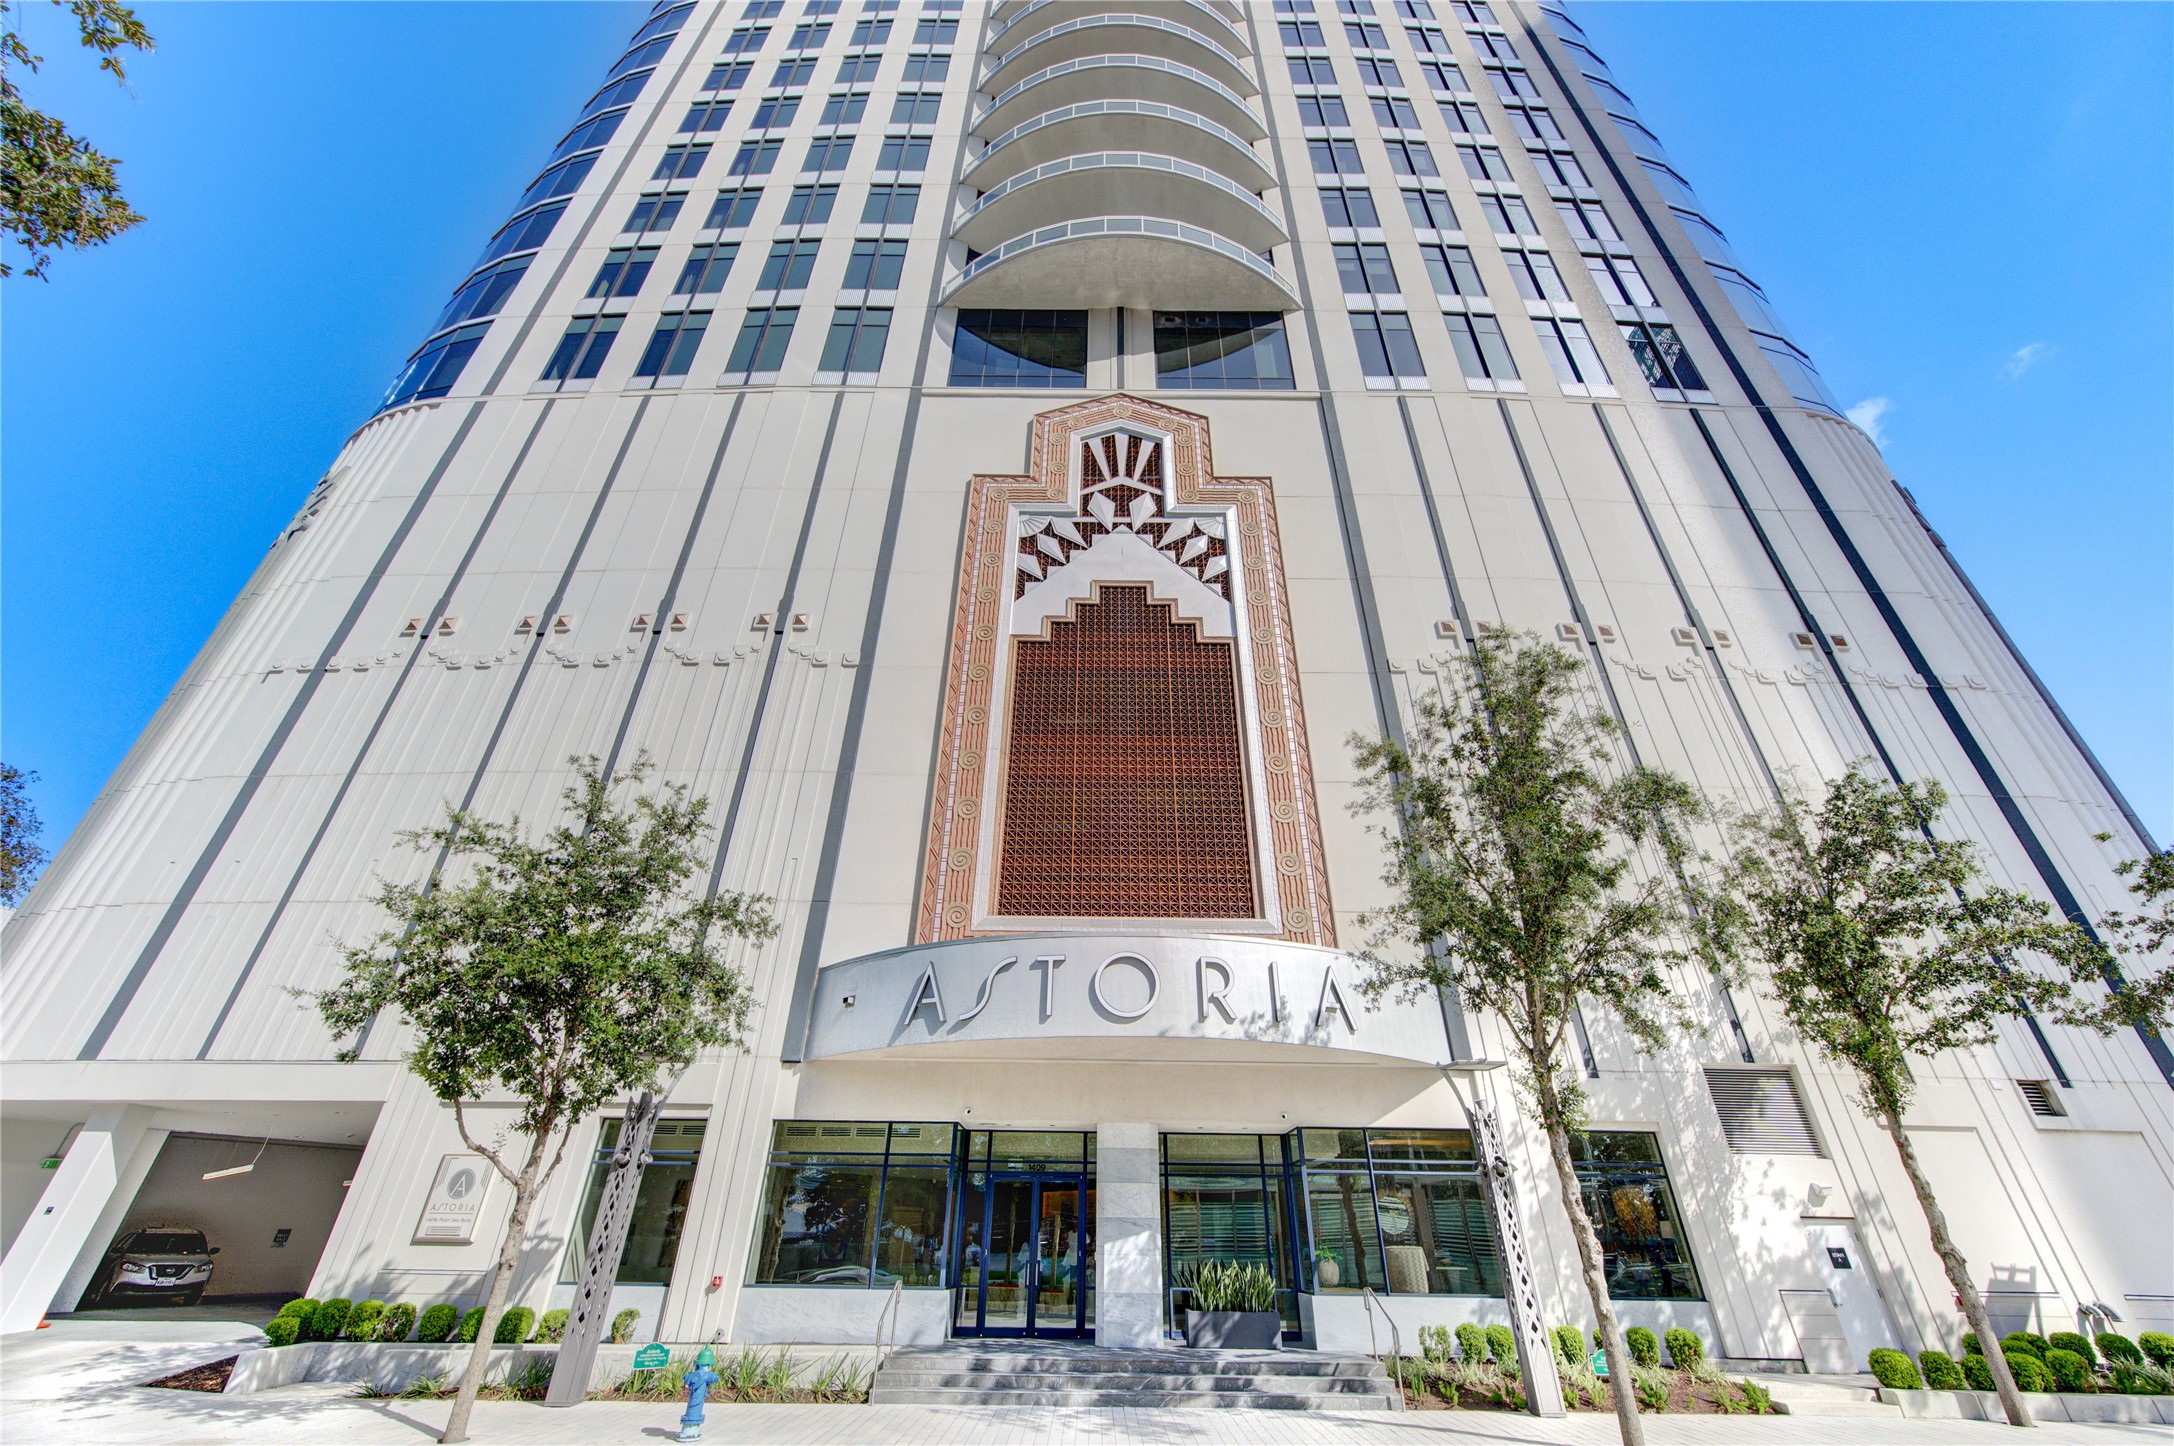 The Astoria high-rise offers luxury urban living in one of Houston’s most sought-after locations.